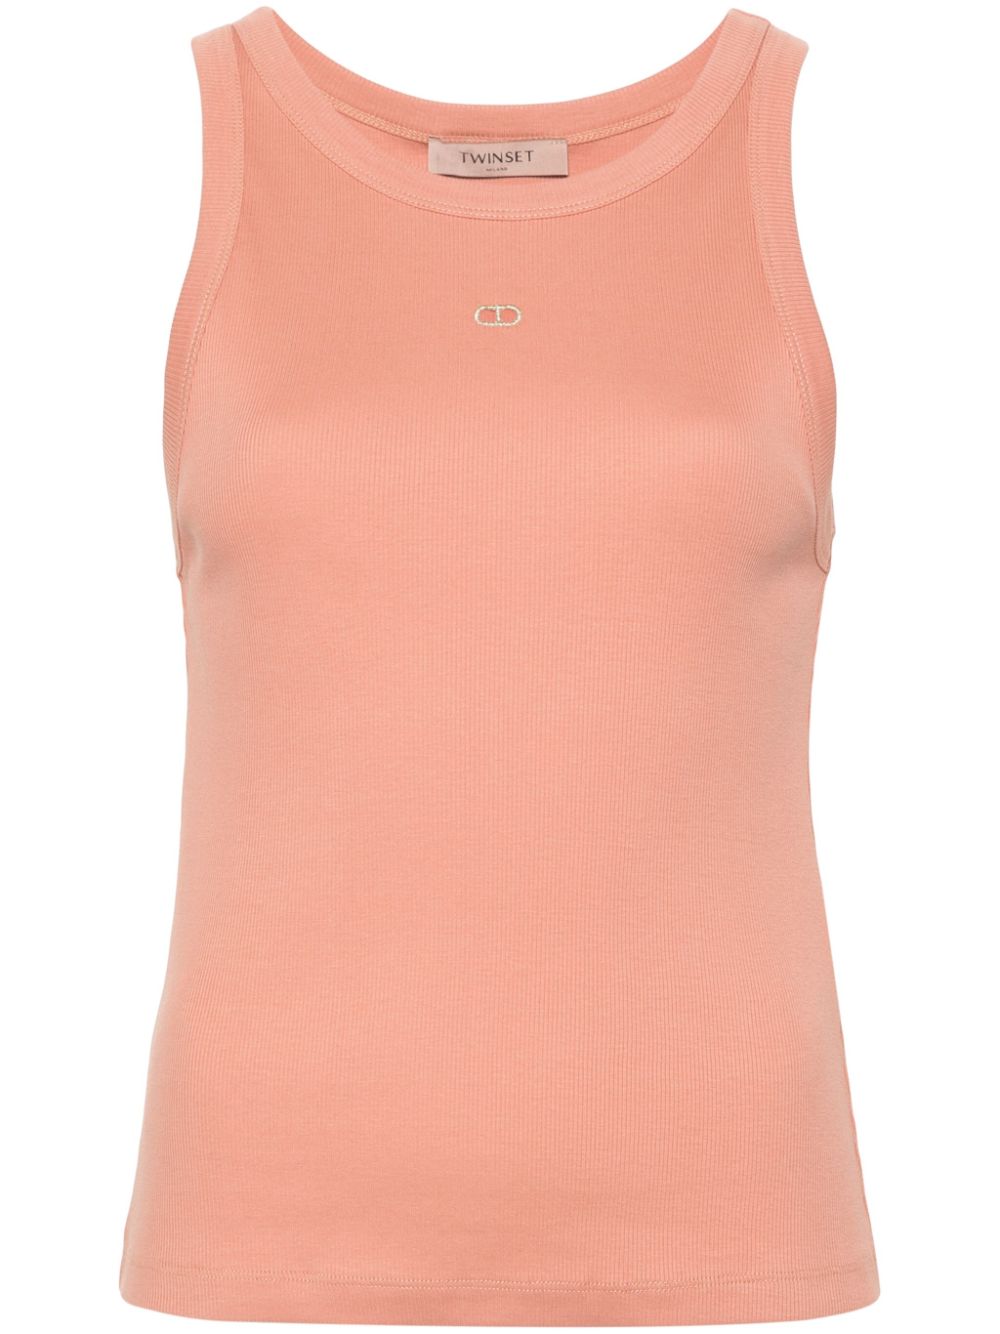 TWINSET cut out-detail ribbed top - Pink von TWINSET